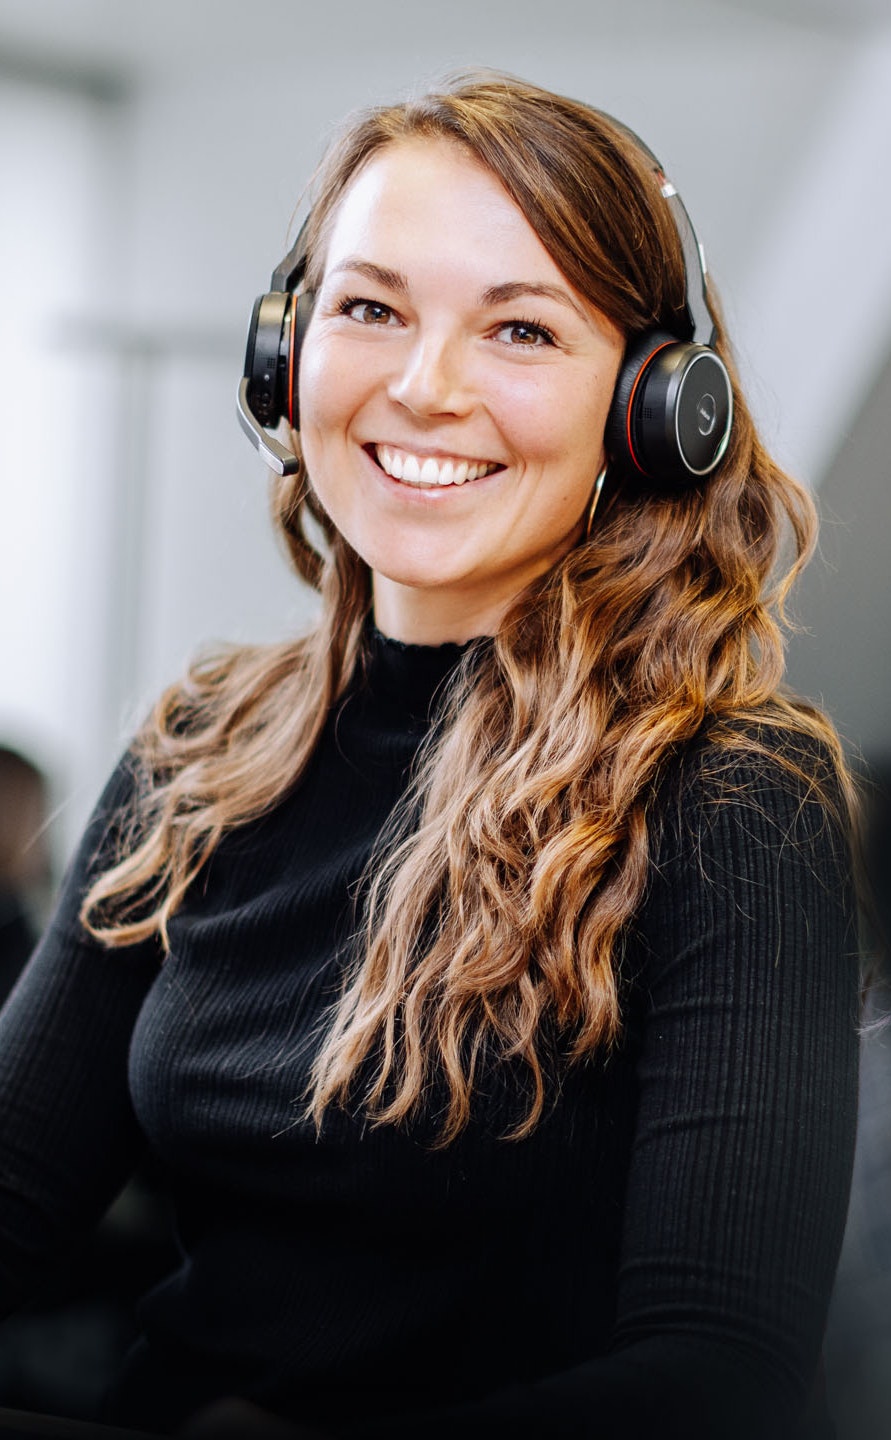 Woman in black pullover with headset